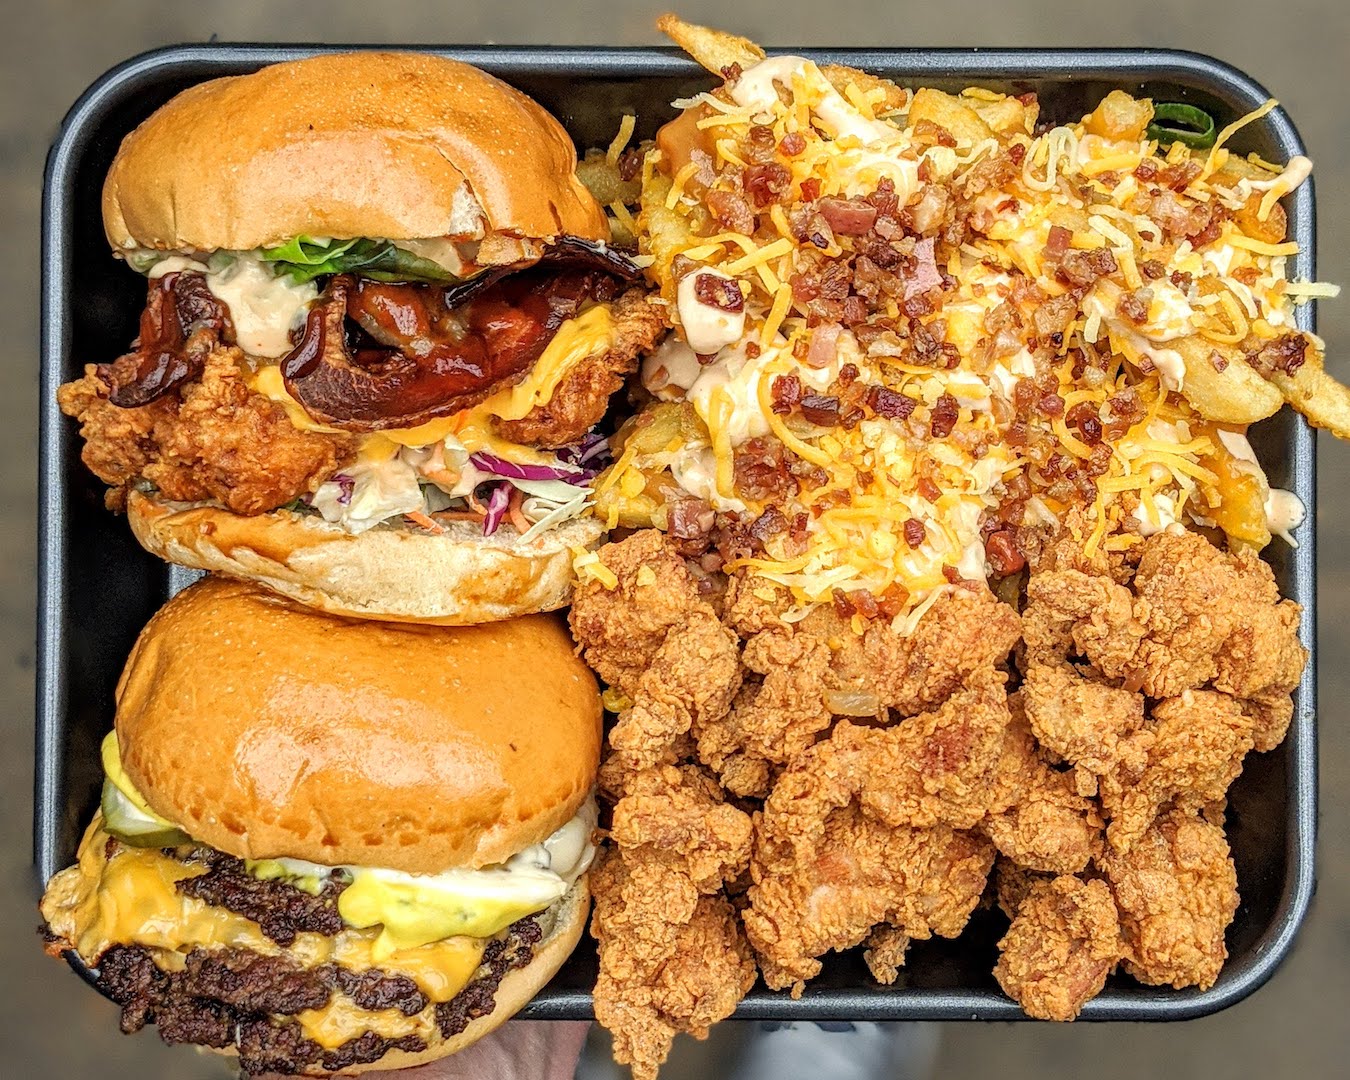 Milky Lane burgers and sides